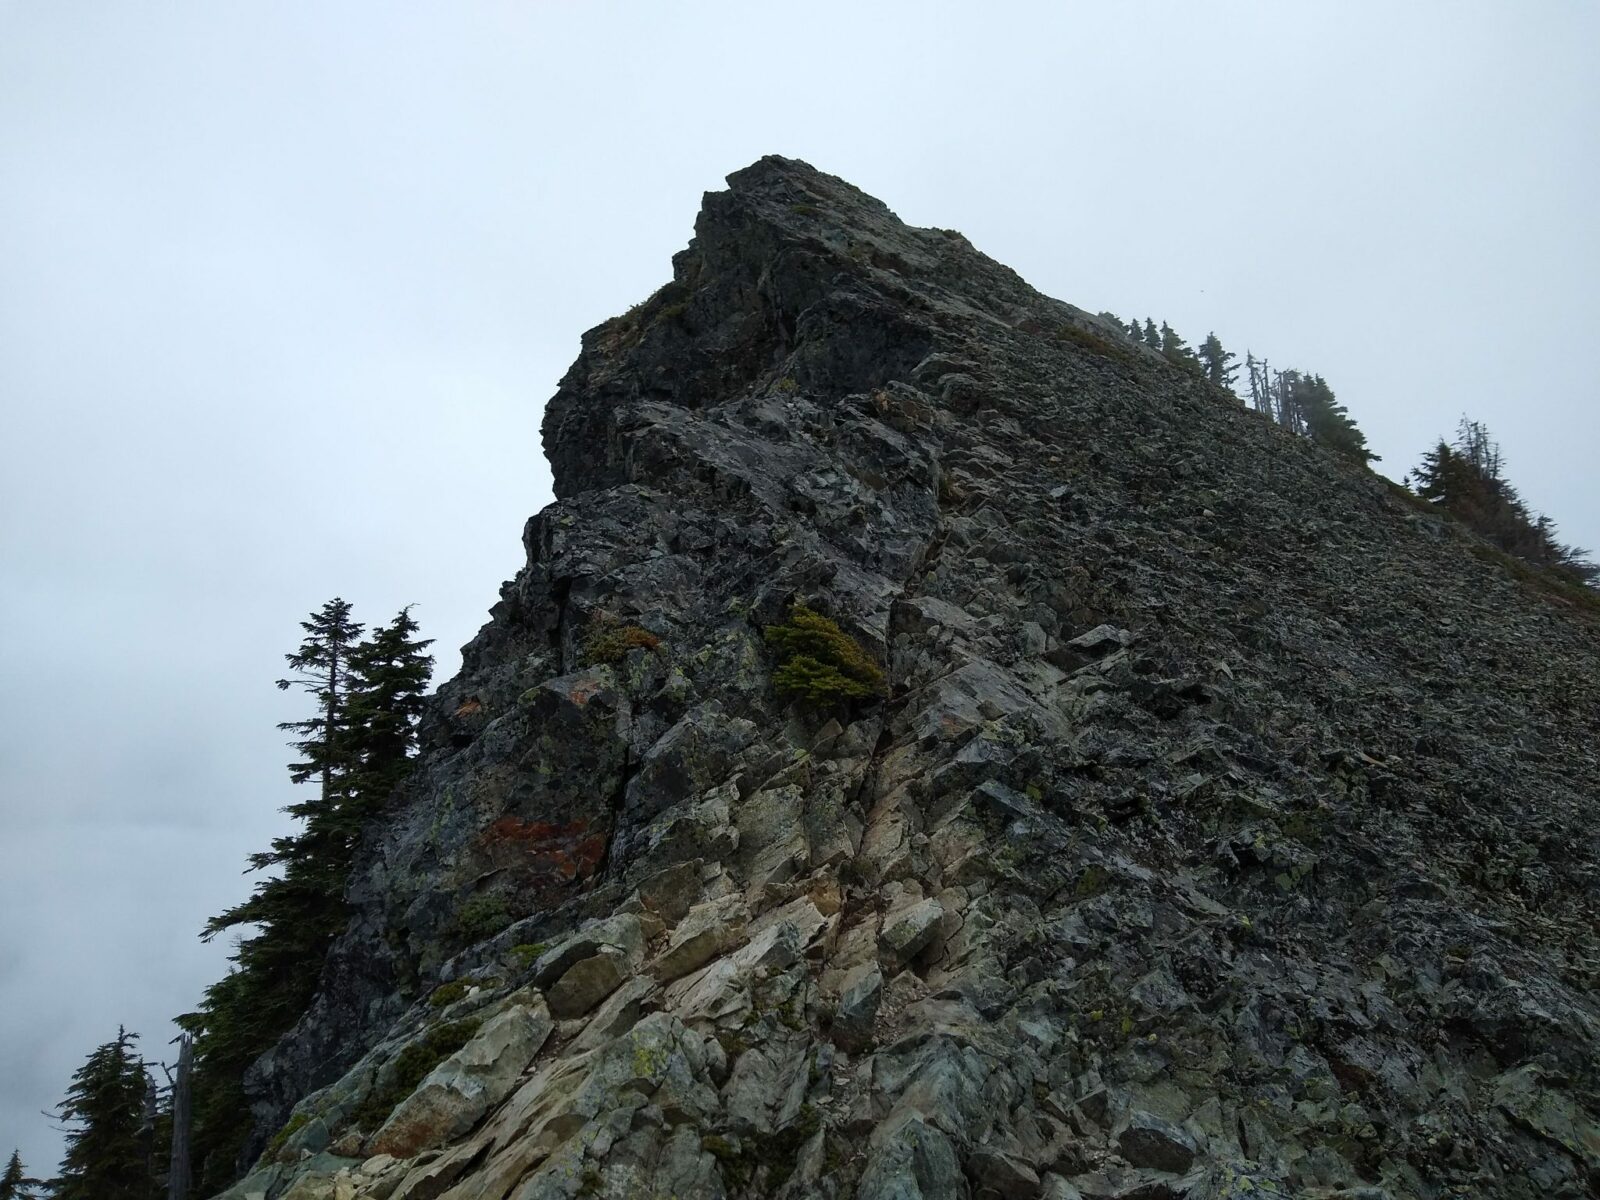 The summit block on the McClellan Butte hike. It is an angled gray rock sticking into the fog, surrounded with a few evergreen trees